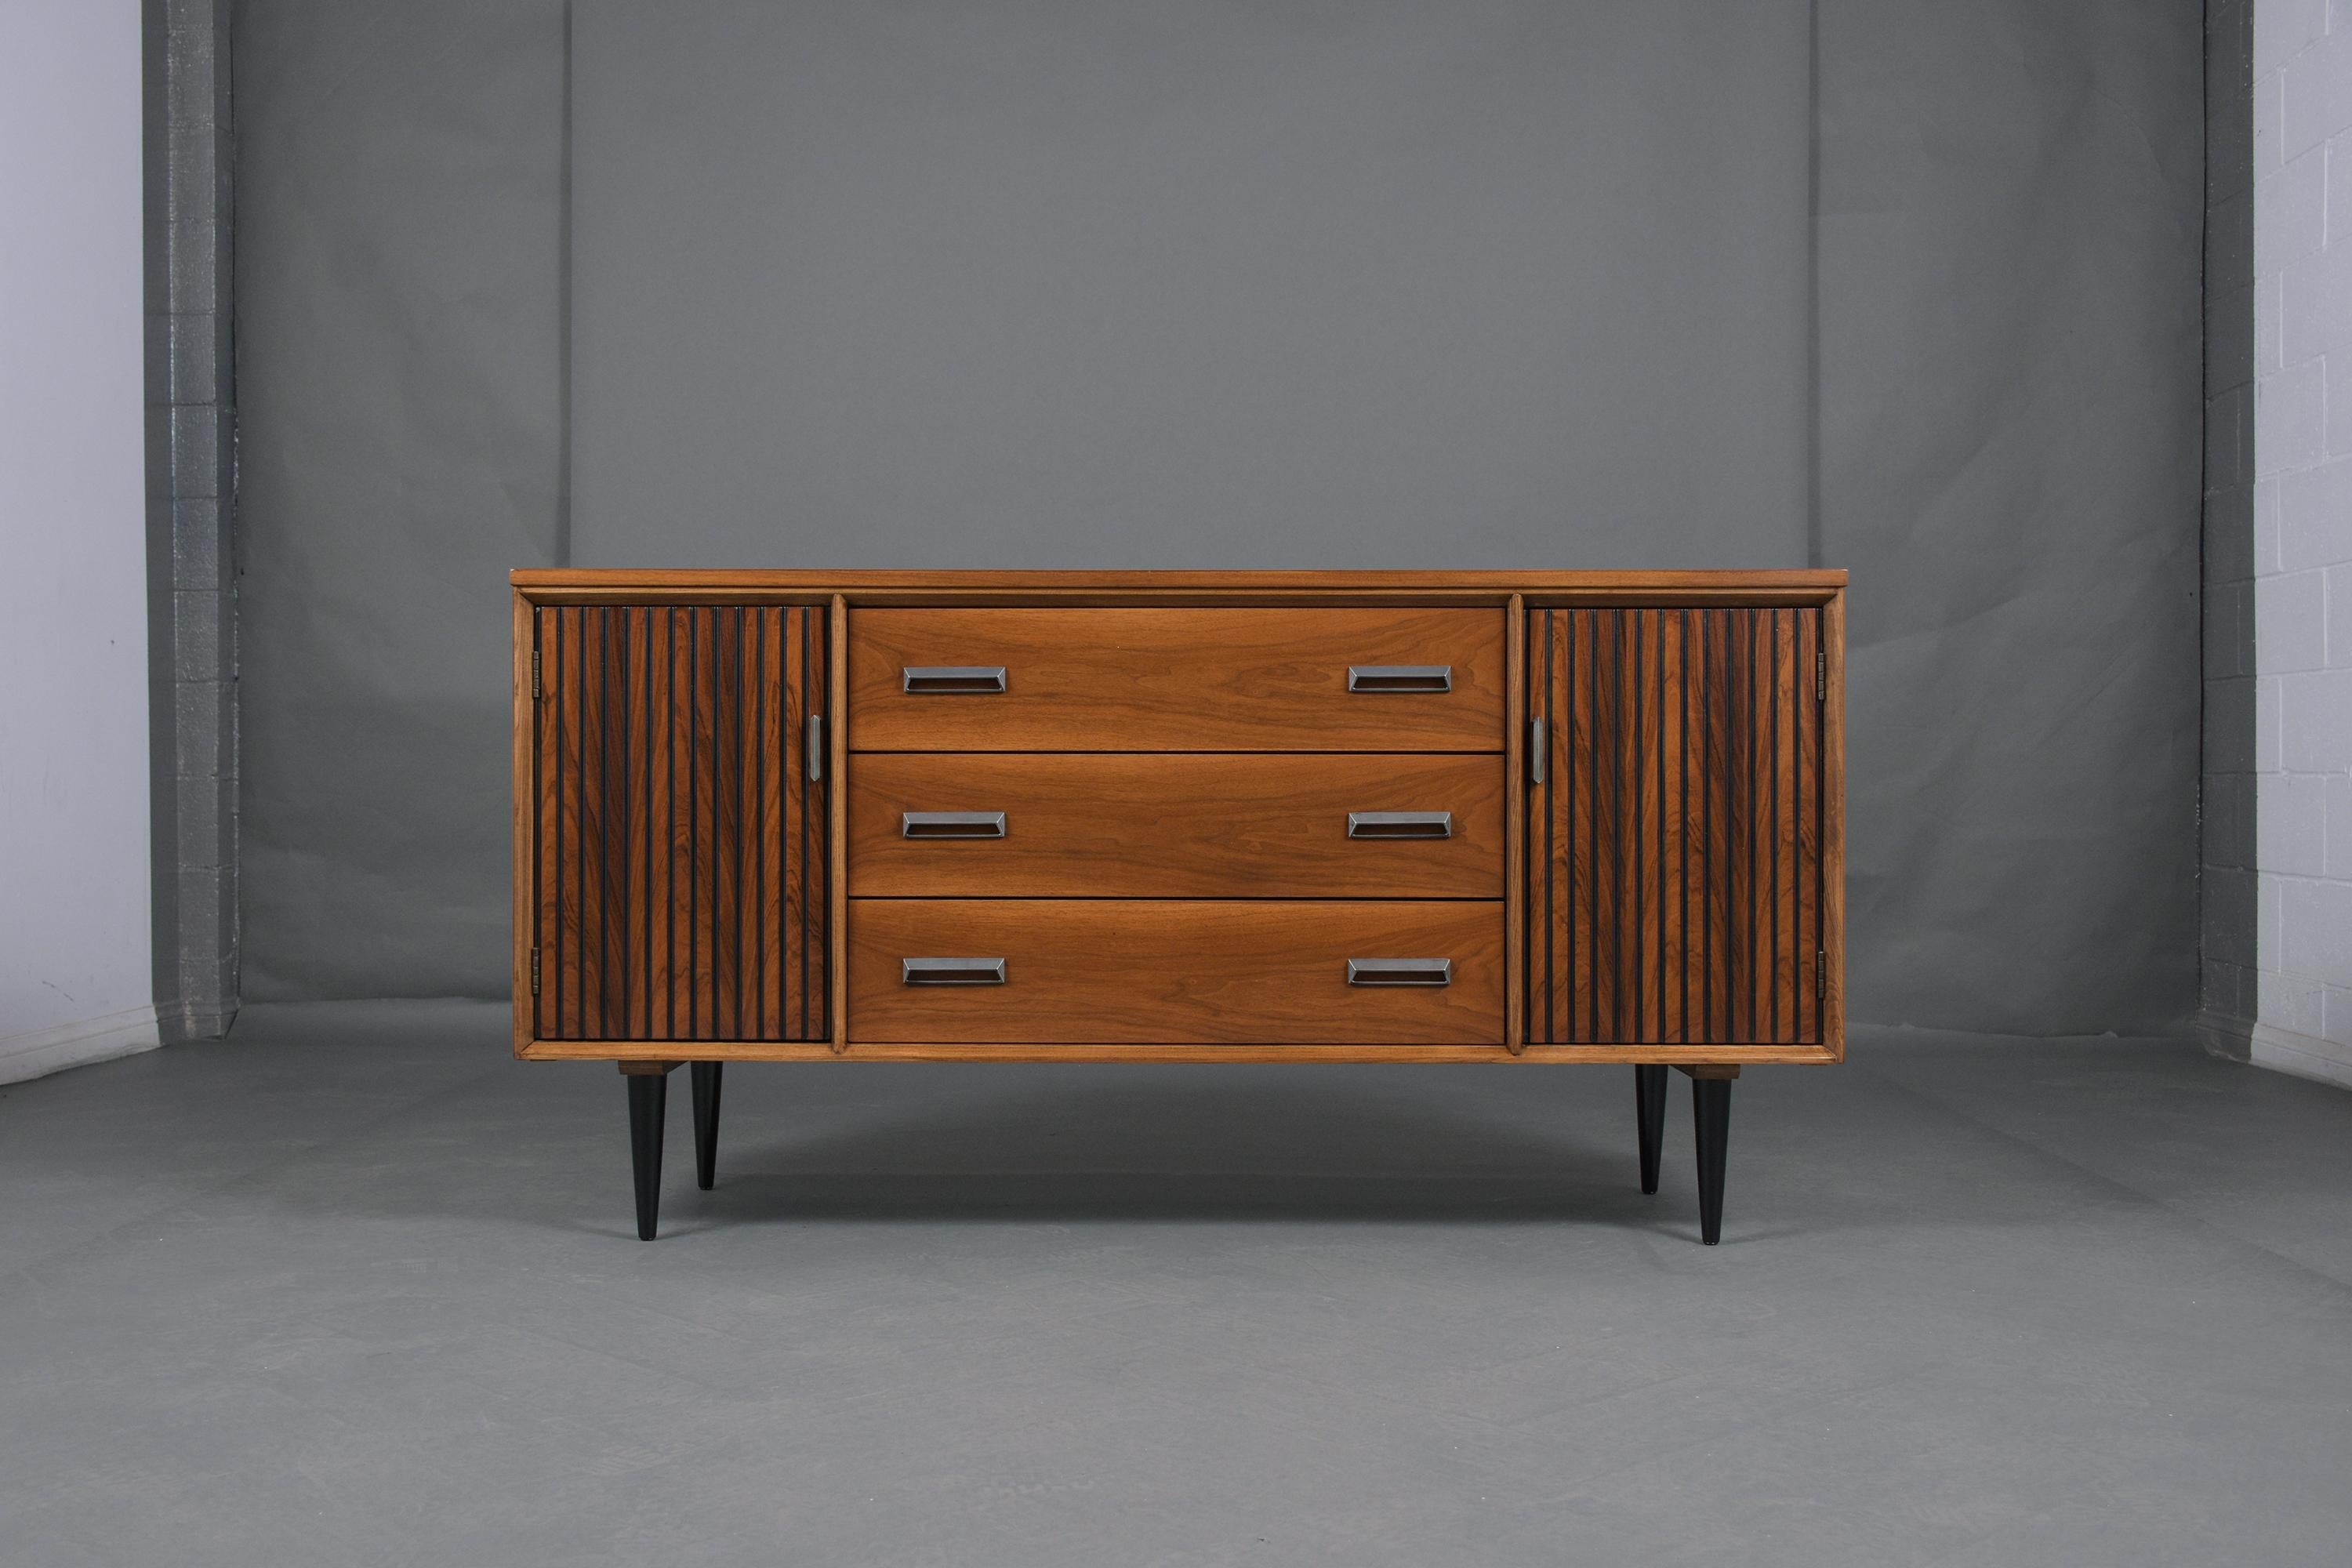 An extraordinary danish credenza hand-crafted out of rosewood and has been professionally restored by our team of expert craftsmen. This piece features three large pull-out drawers that open and close with ease each with double steel handles, two